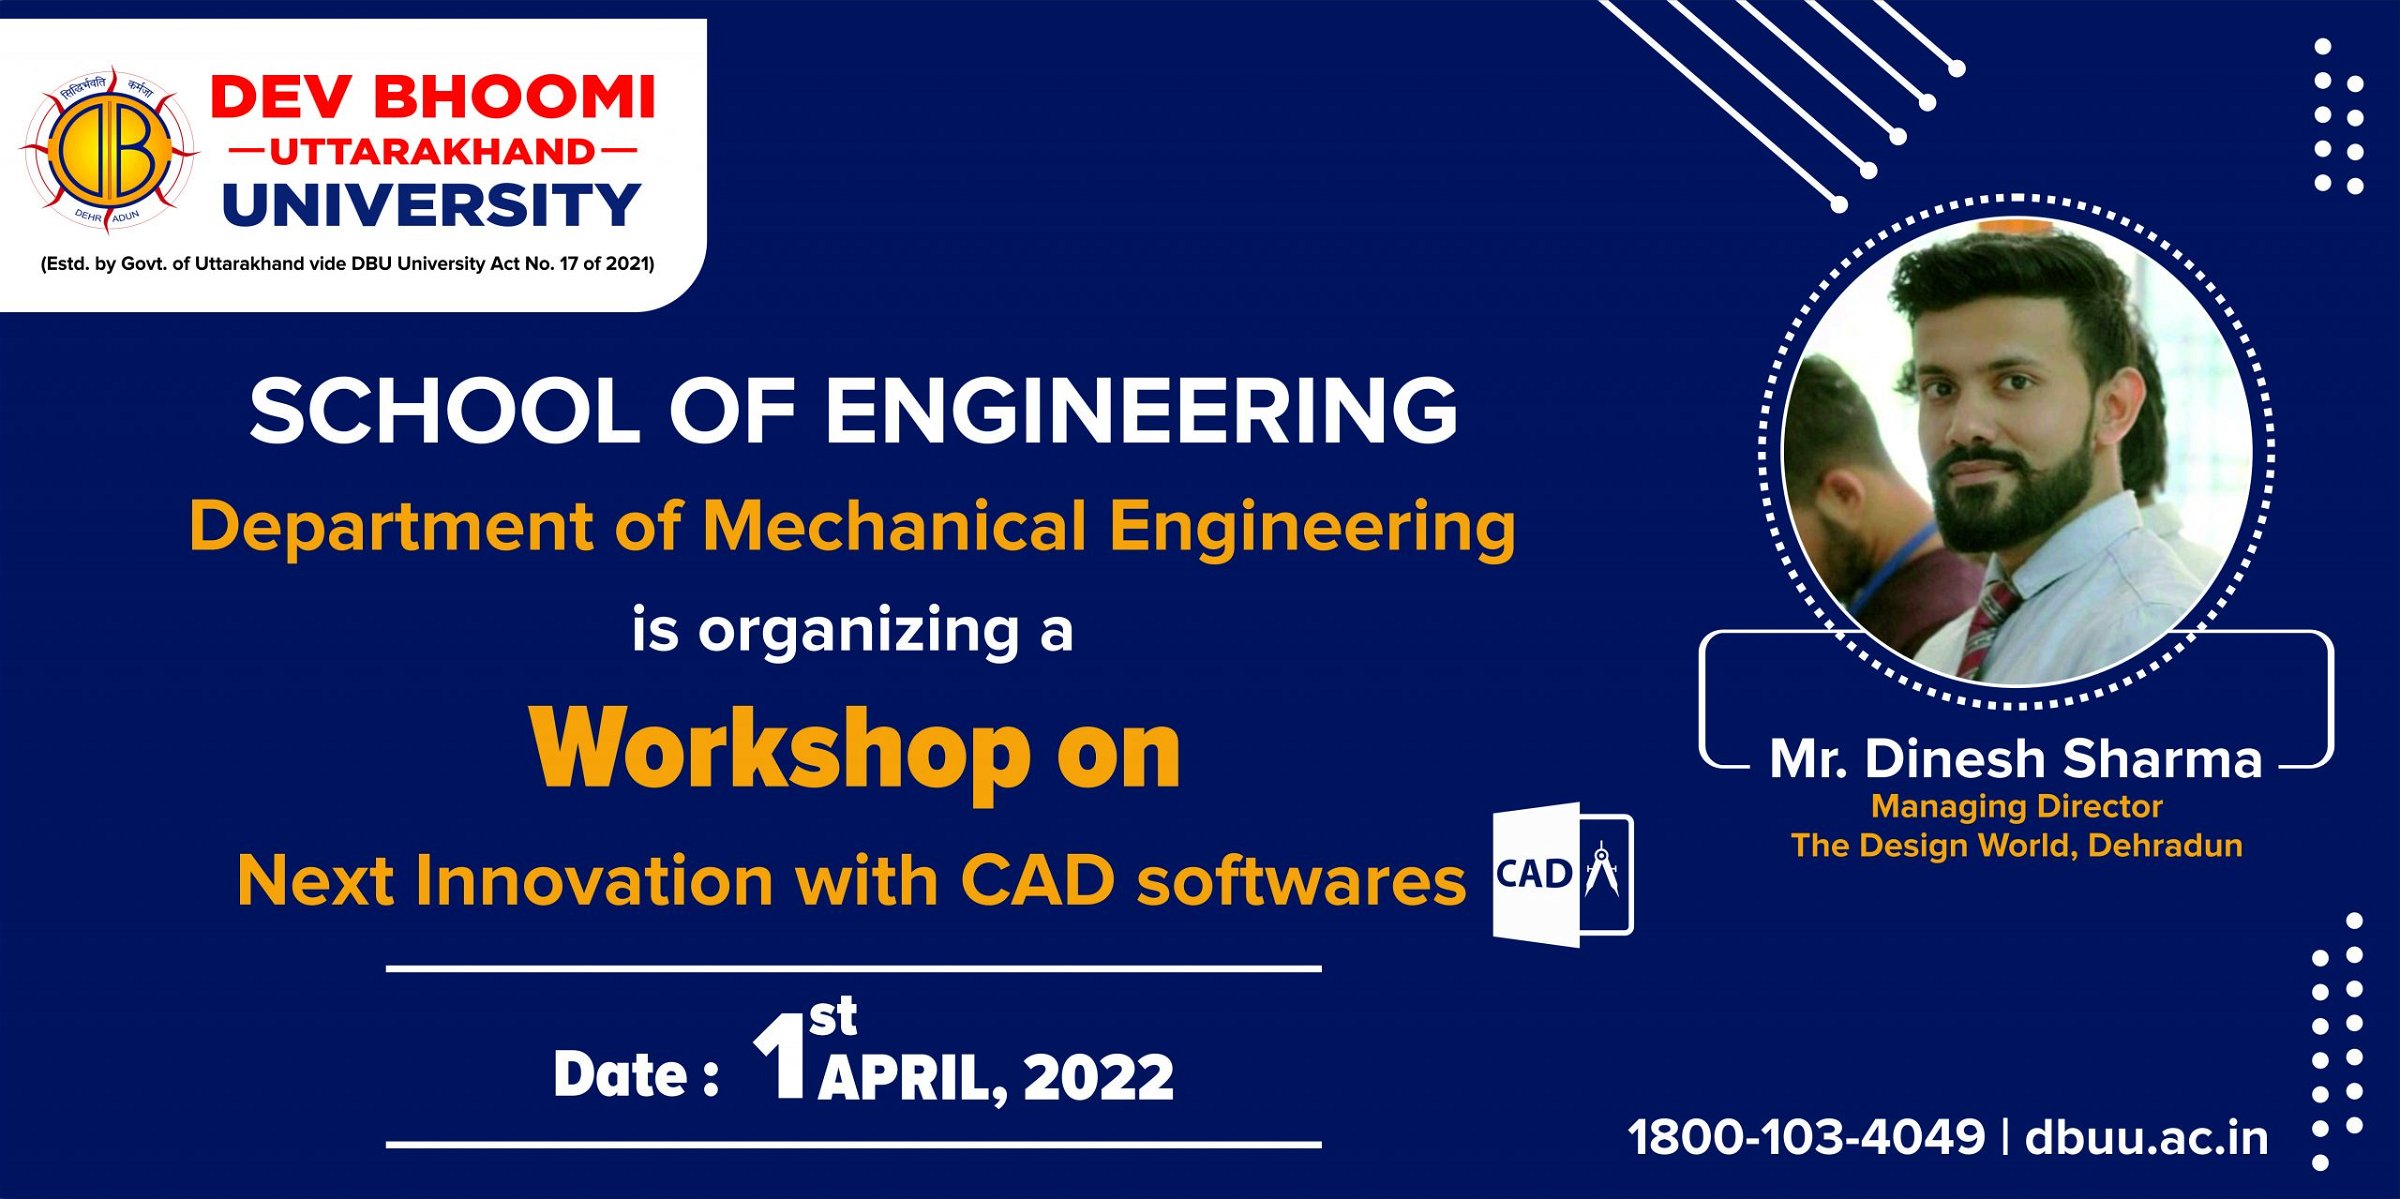 Next Innovation with CAD softwares